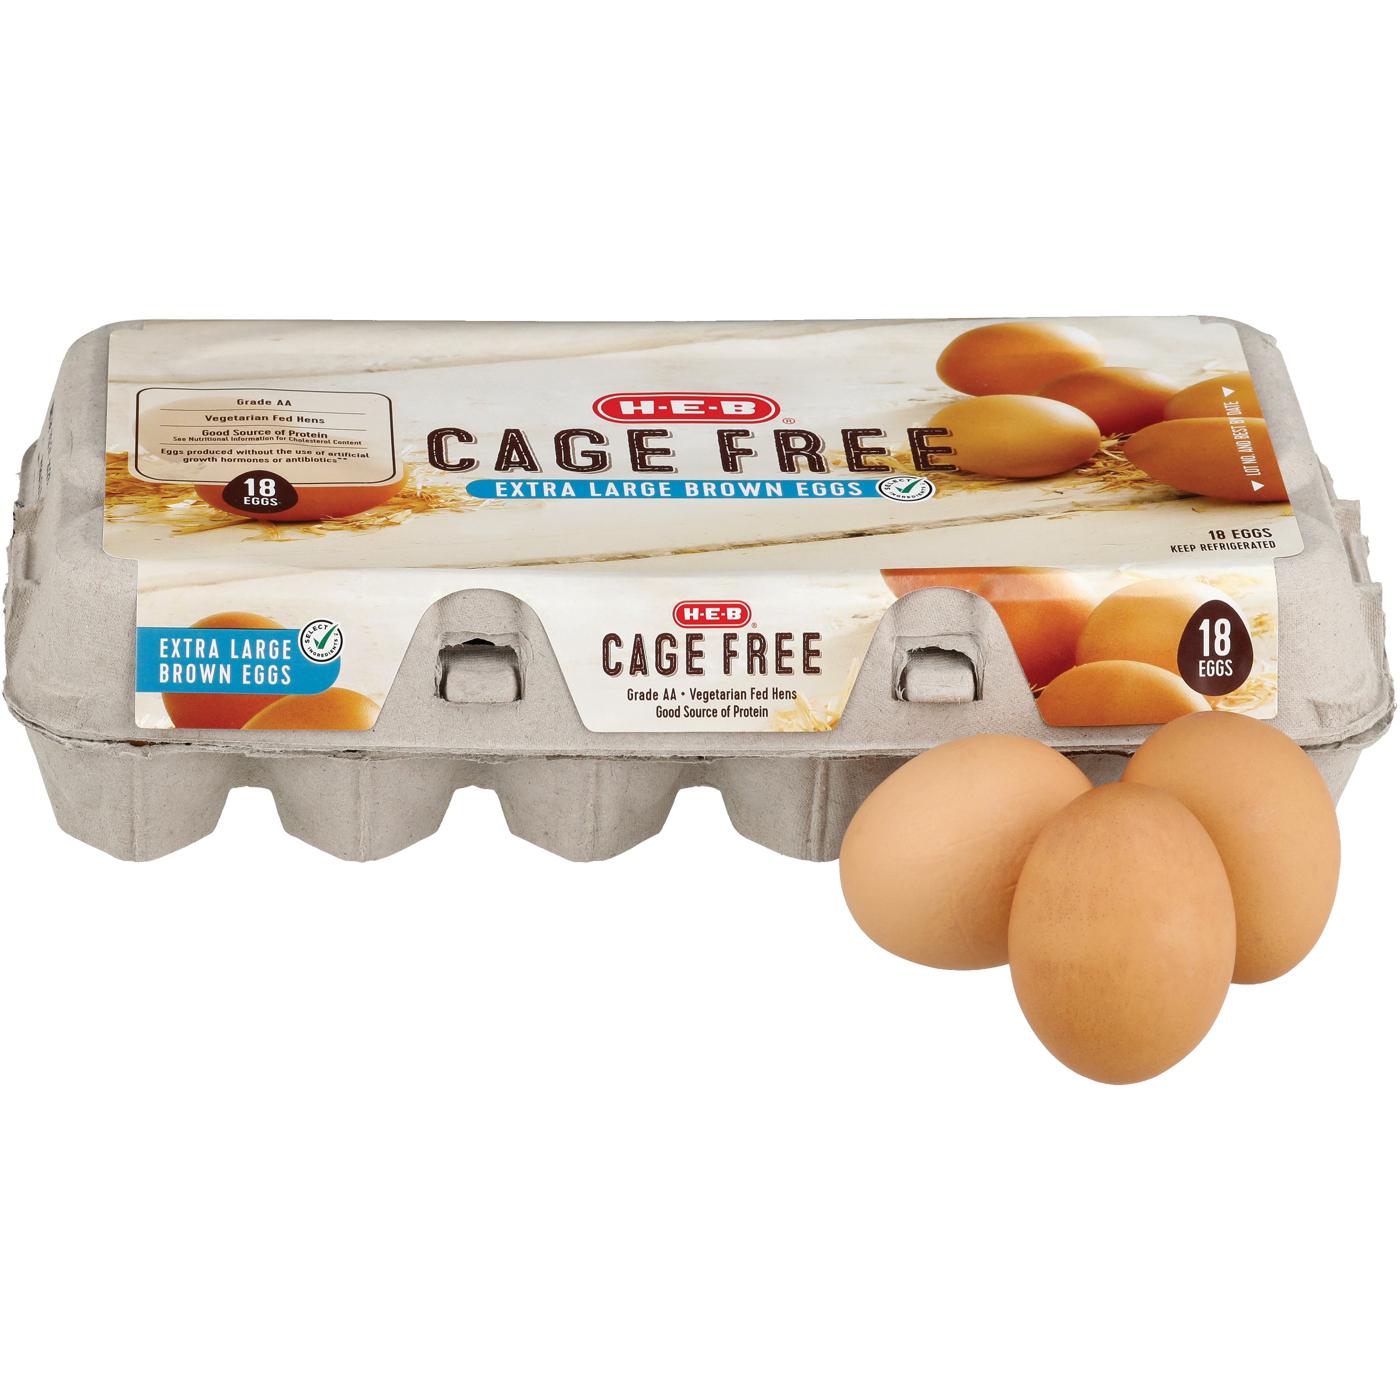 H-E-B Grade AA Cage Free Extra Large Brown Eggs; image 1 of 4